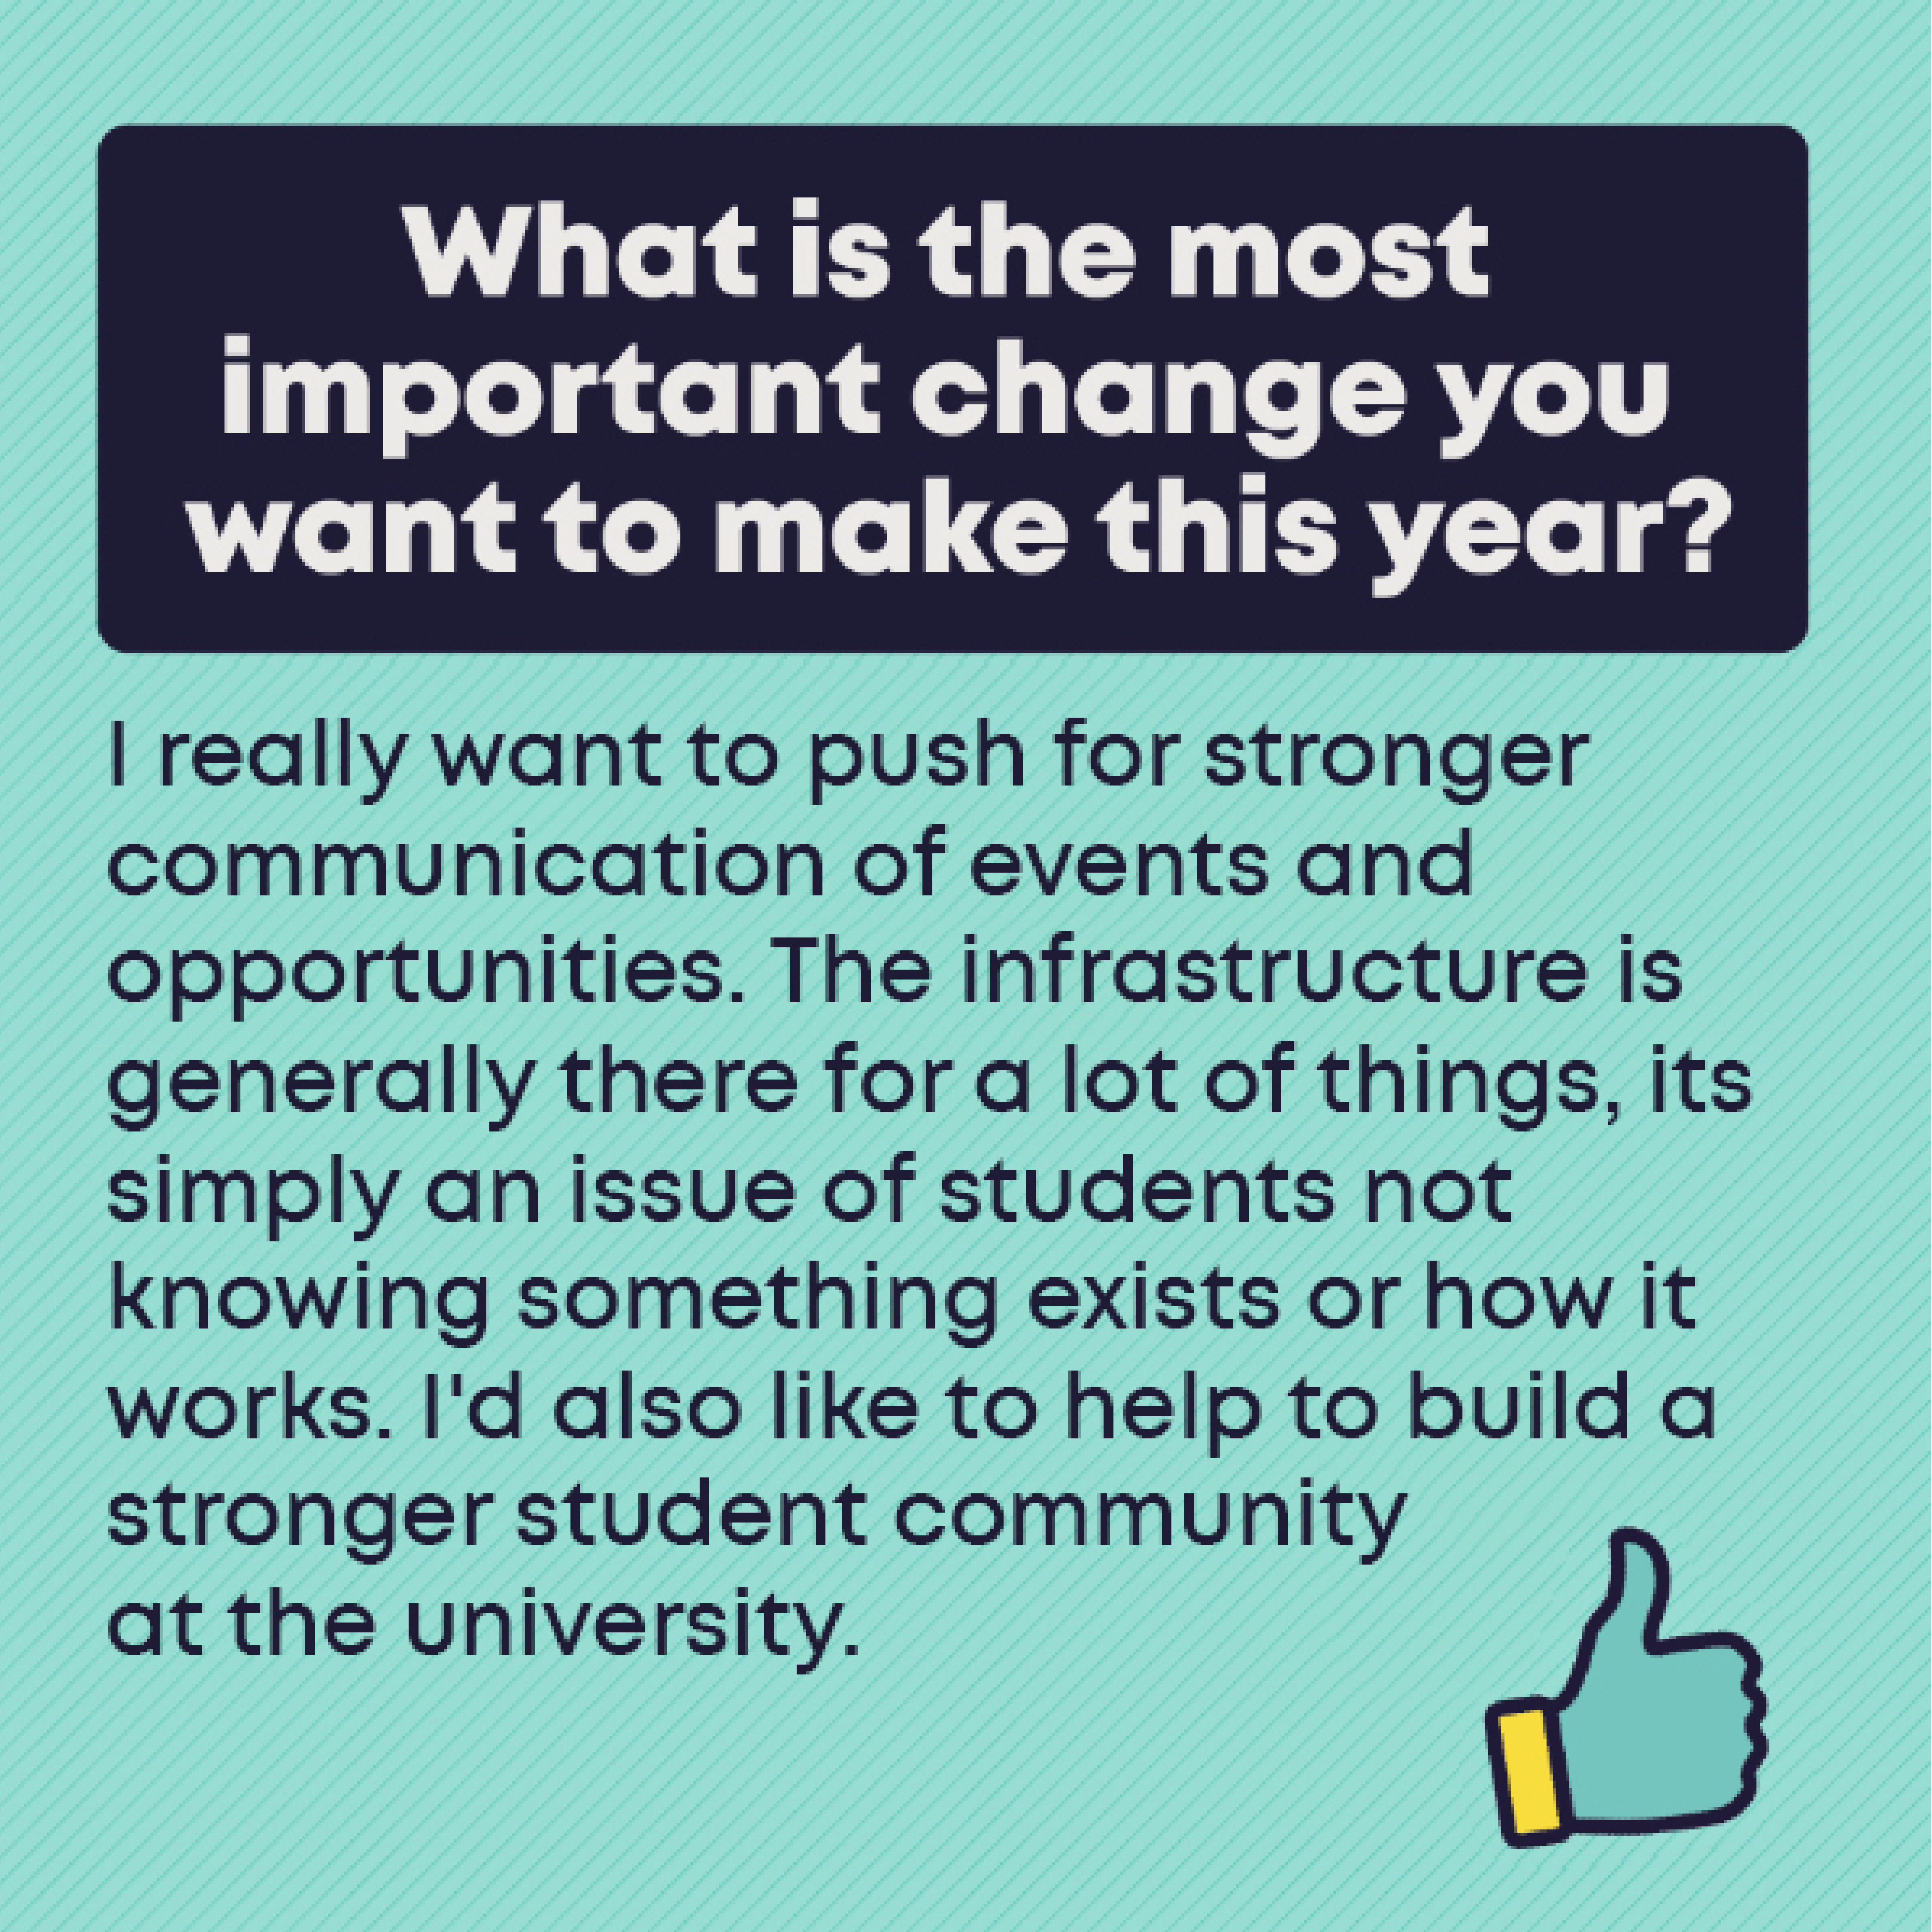 What is the most important change you want to make this year?          I really want to push for stronger communication of events and opportunities. The infrastructure is generally there for a lot of things, its simply an issue of students not knowing something exists or how it works. I'd also like to help to build a stronger student community at the university. 